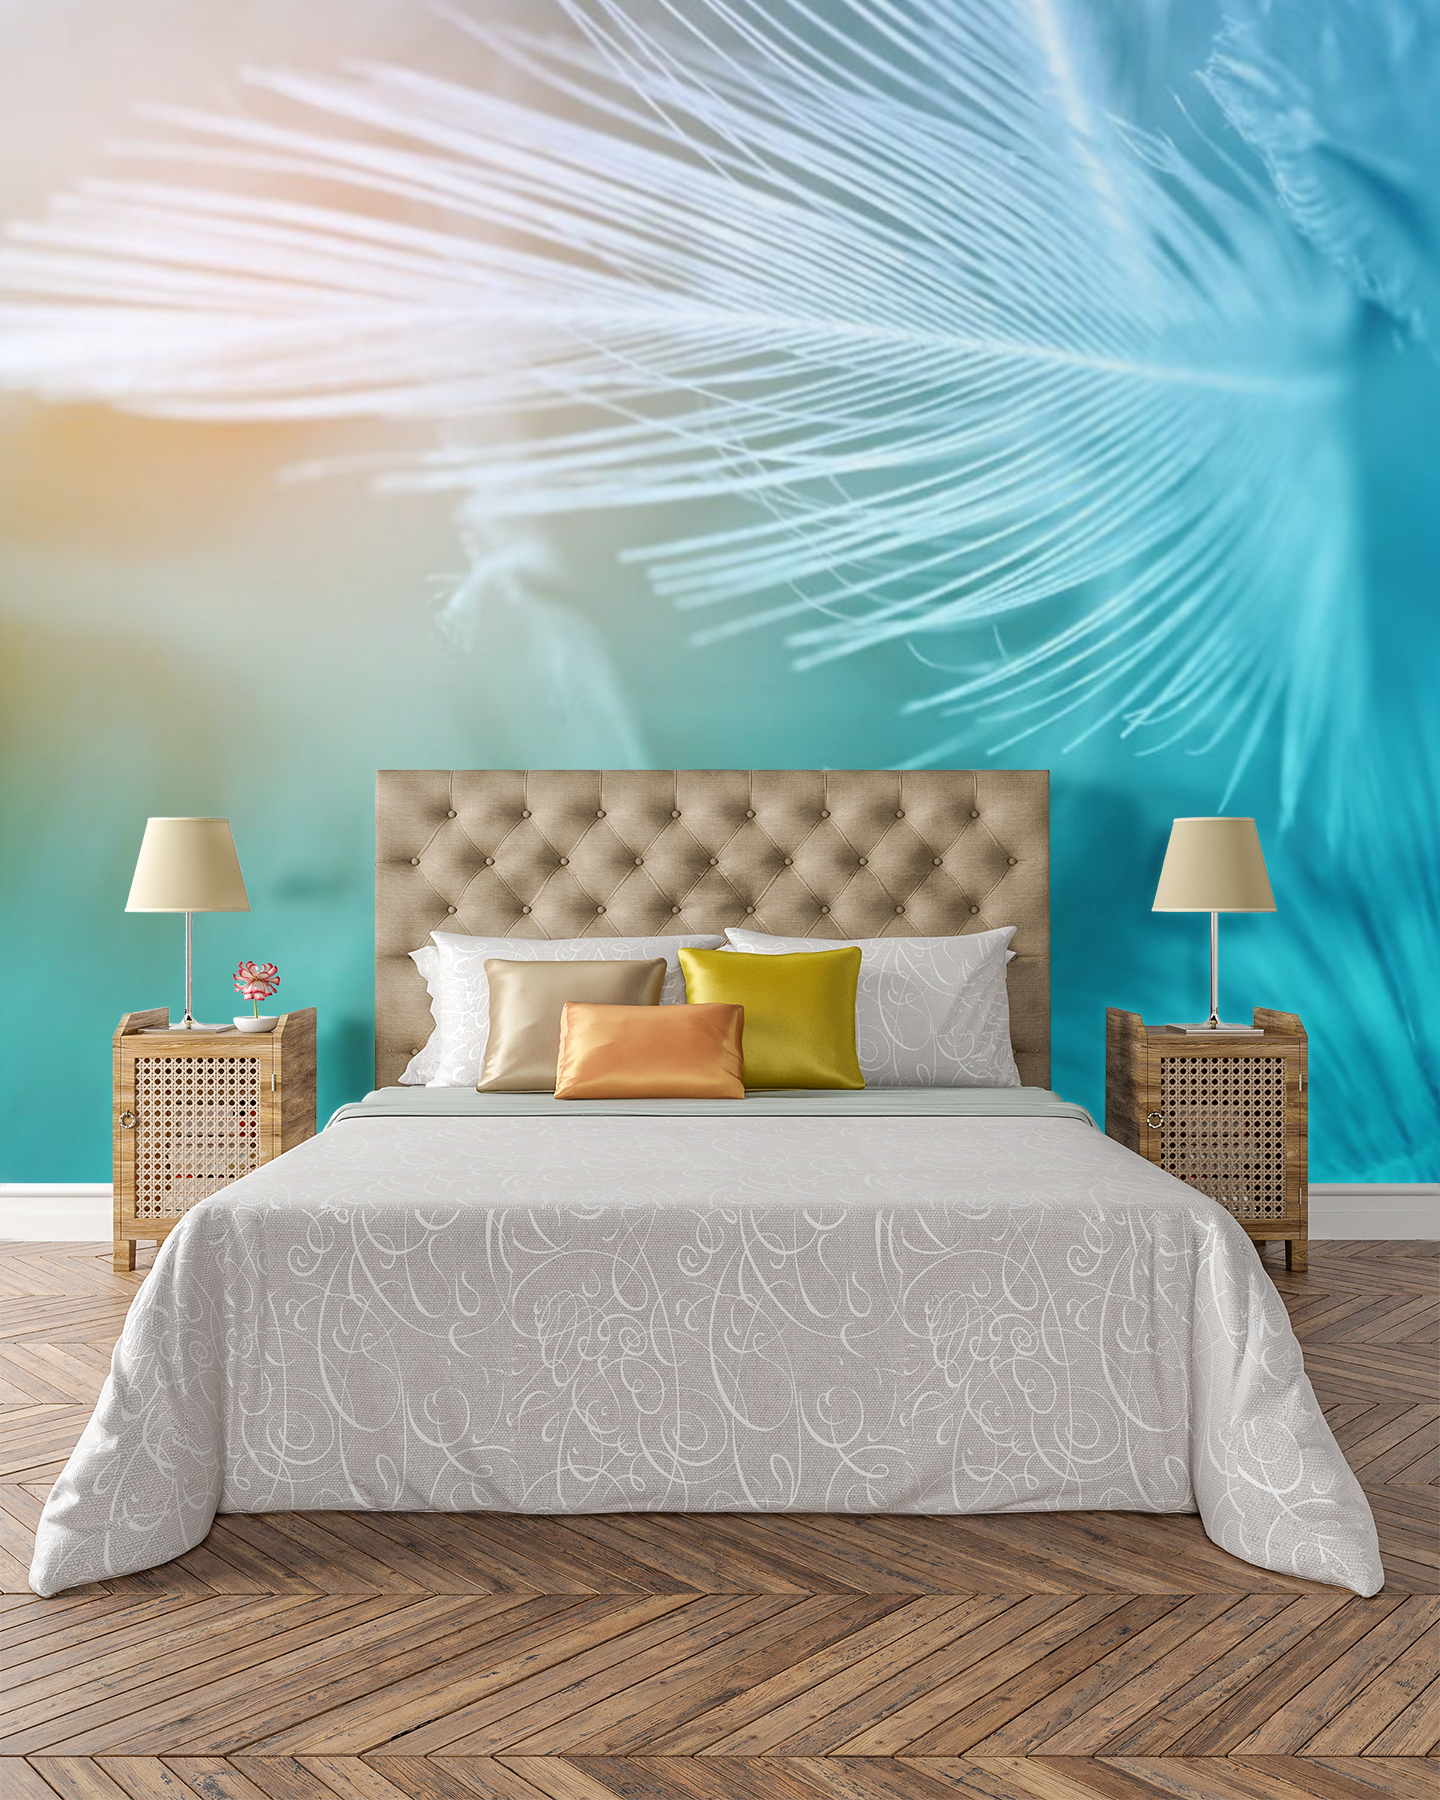 Blue Feathers   - 0358 - Wall Murals Printing - wall art